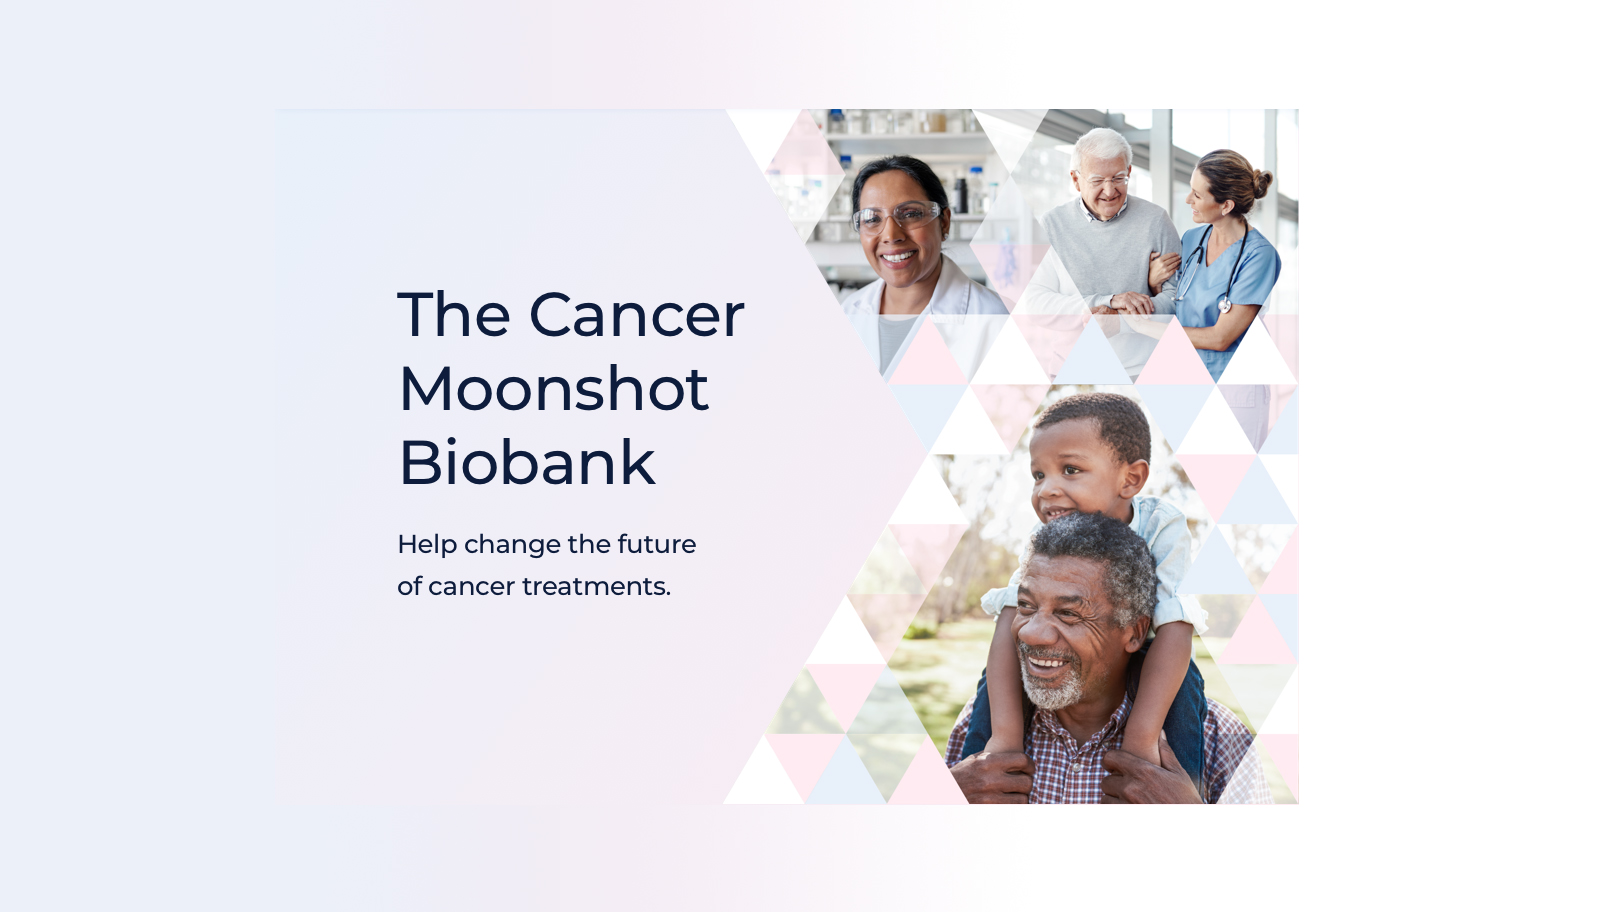 NCI Launches the Cancer Moonshot SM Biobank to Accelerate Research in Cancer Treatment